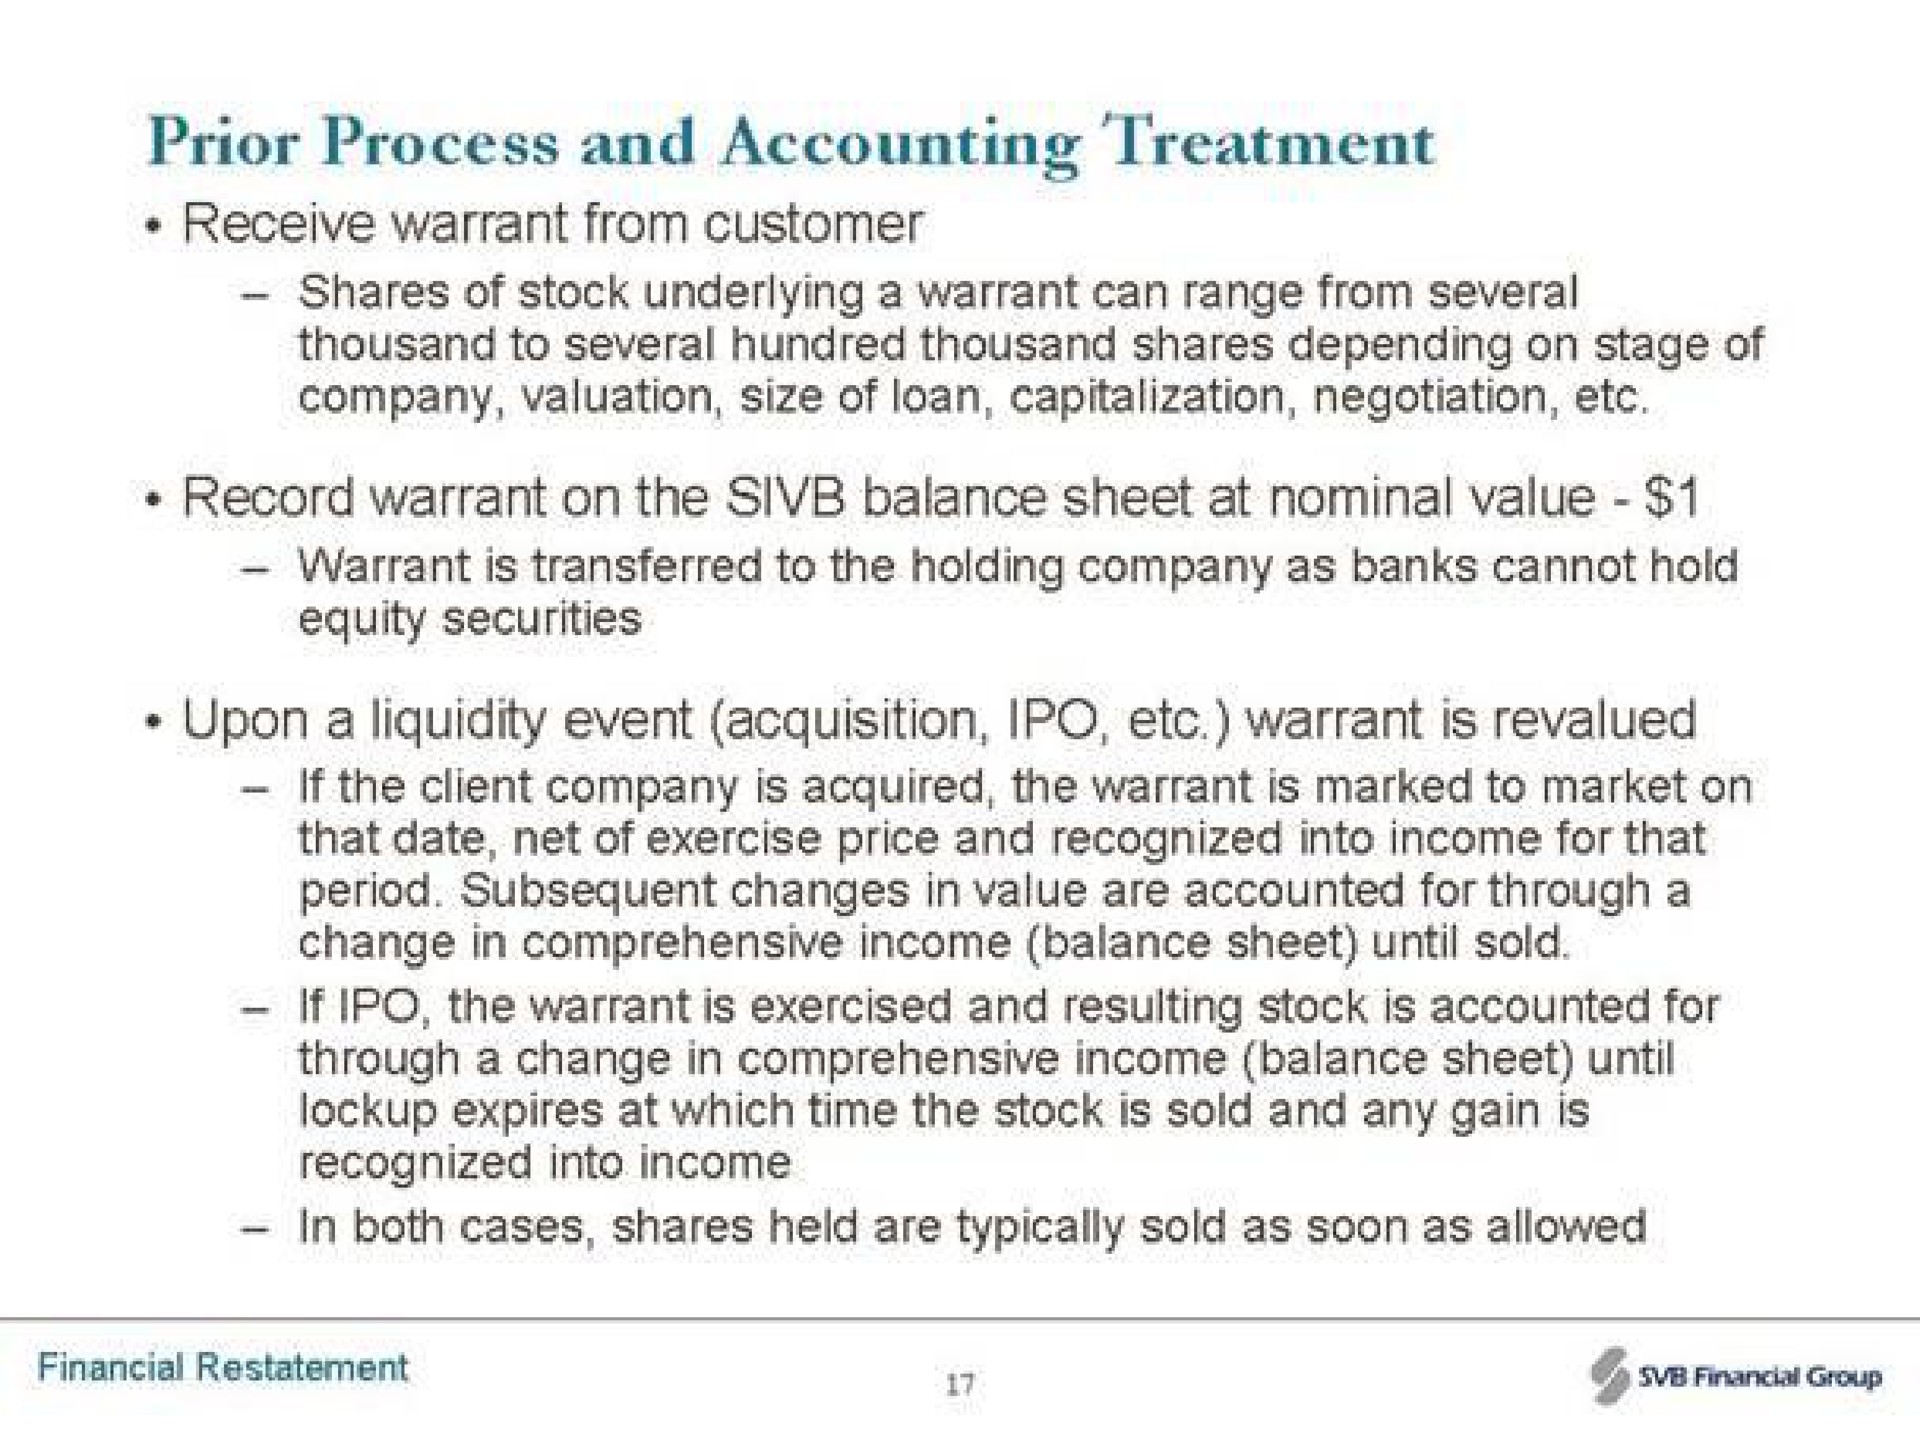 prior process and accounting treatment | Silicon Valley Bank